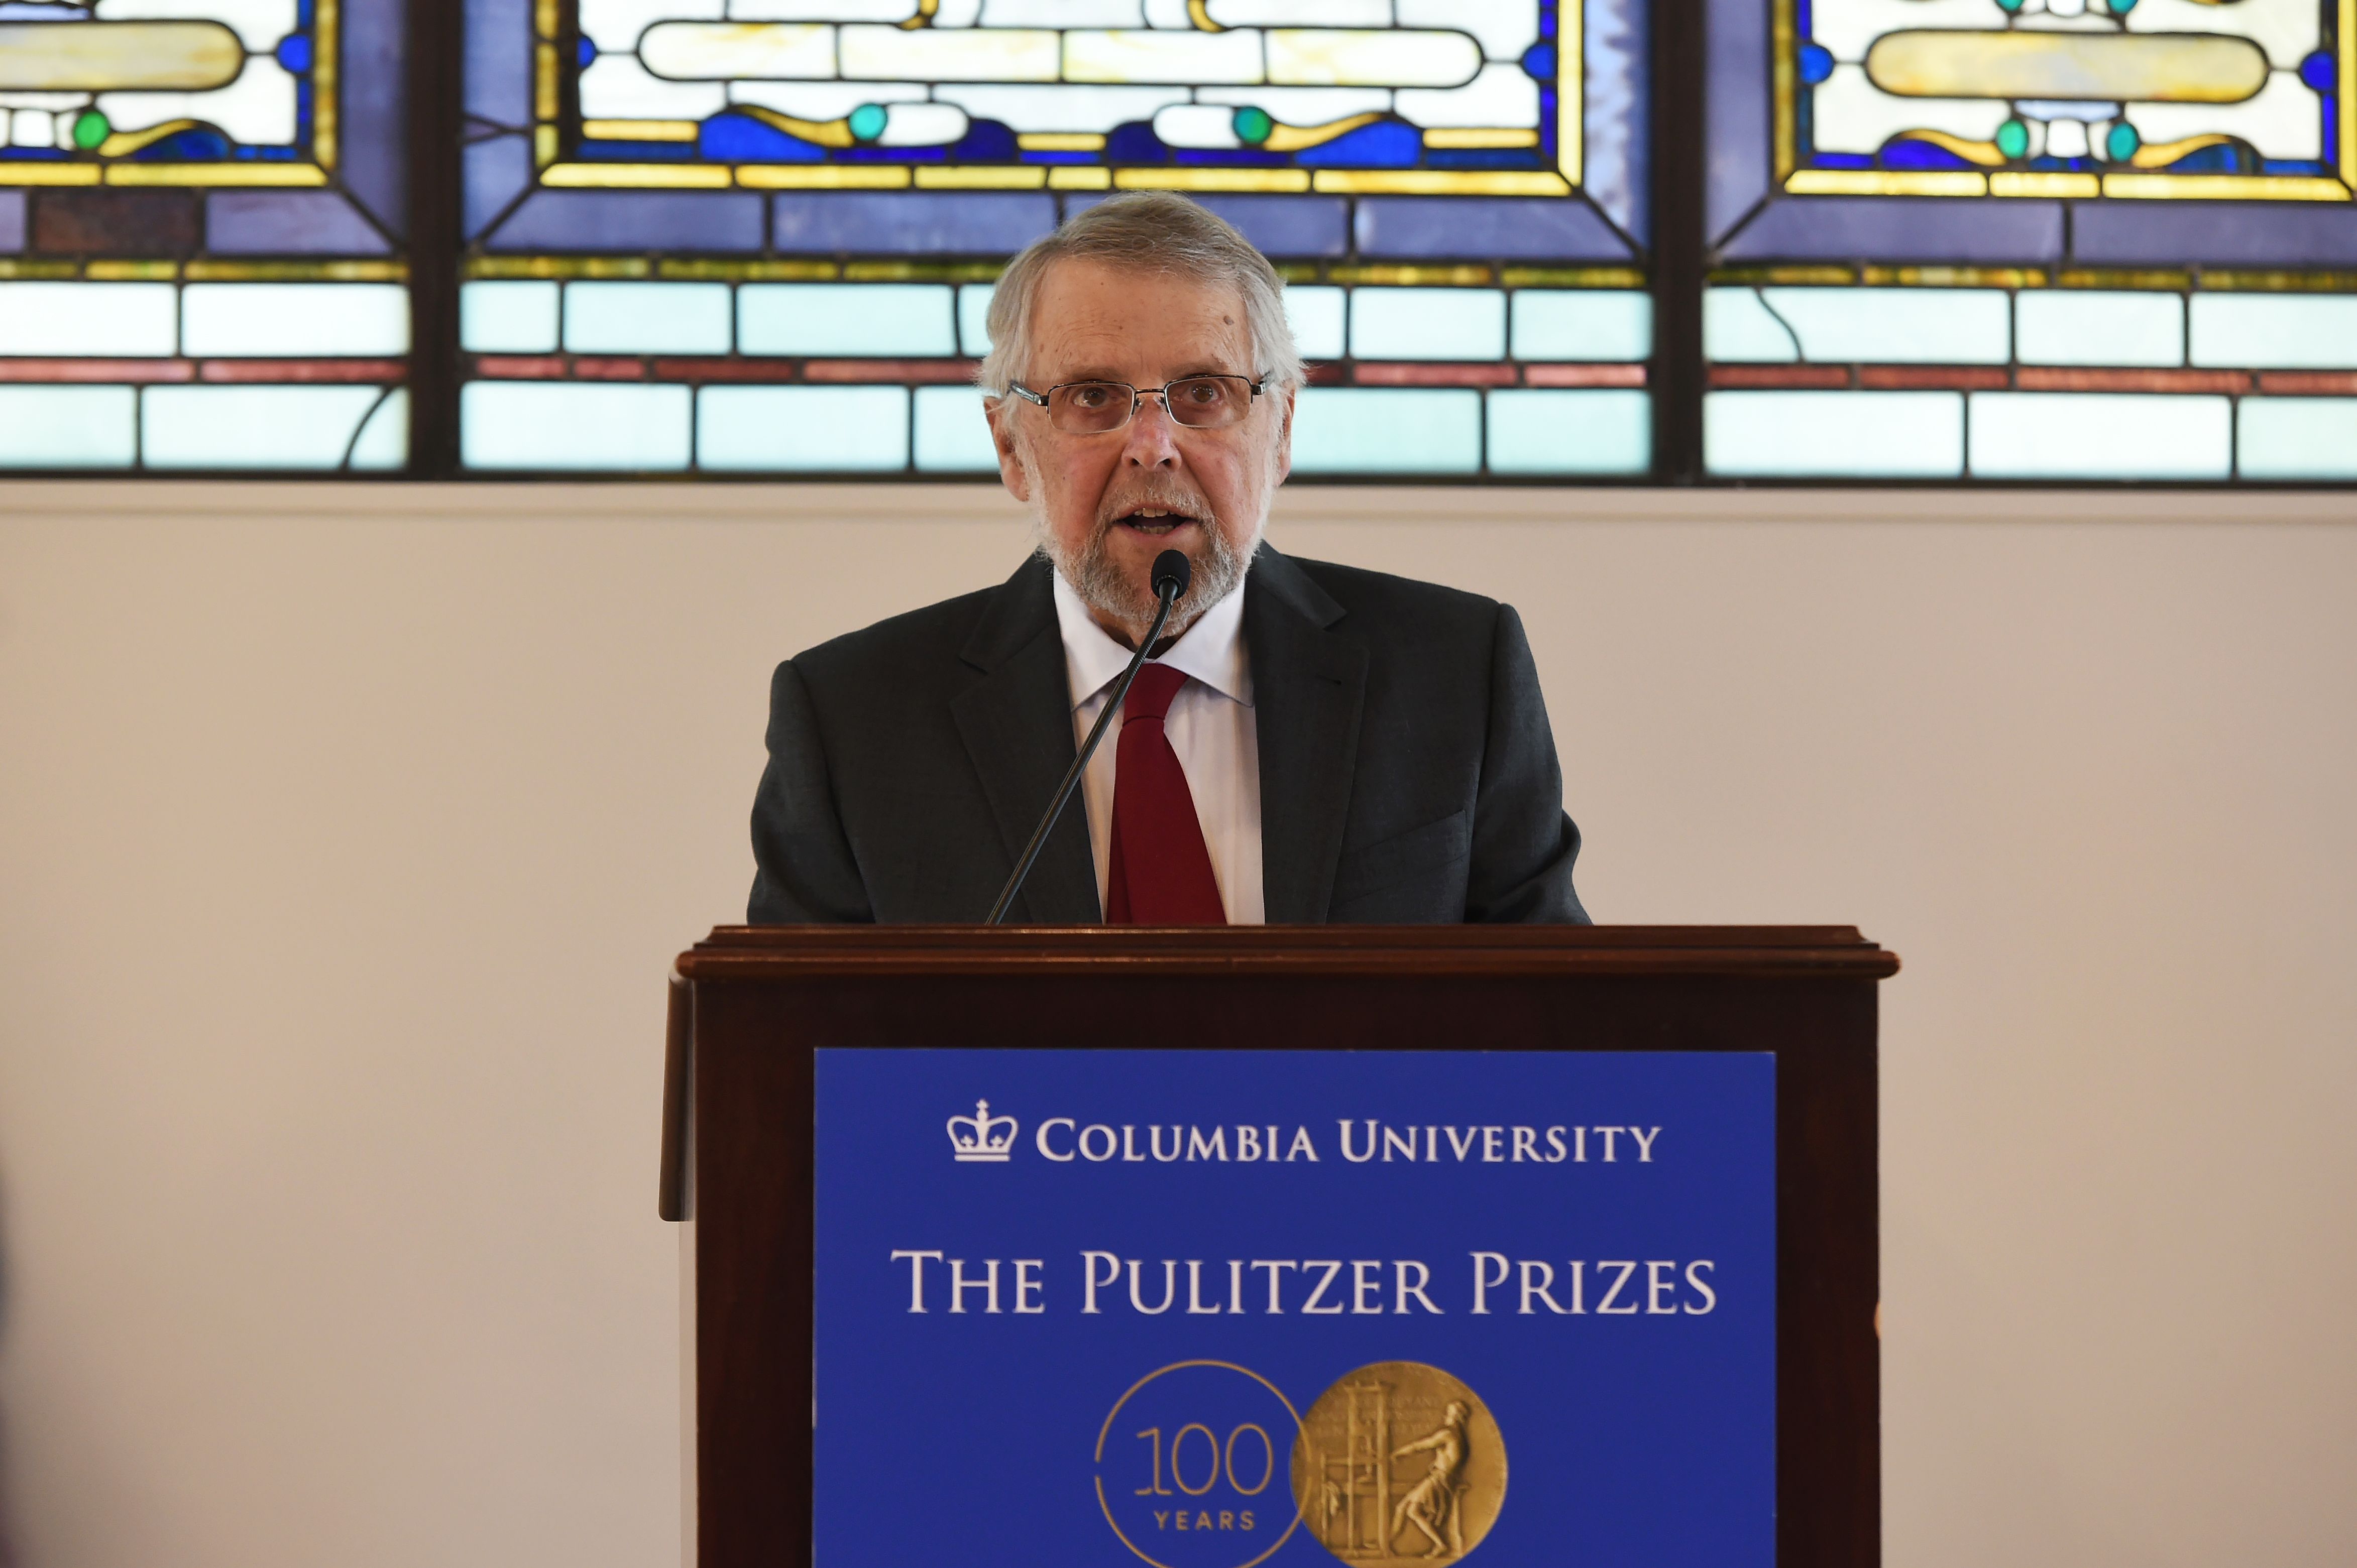 Mike Pride, administrator of The Pulitzer Prizes, announces the 2016 Pulitzer Prize winners at the Columbia University in New York on April 18, 2016. (Jewel Samad—AFP/Getty Images)